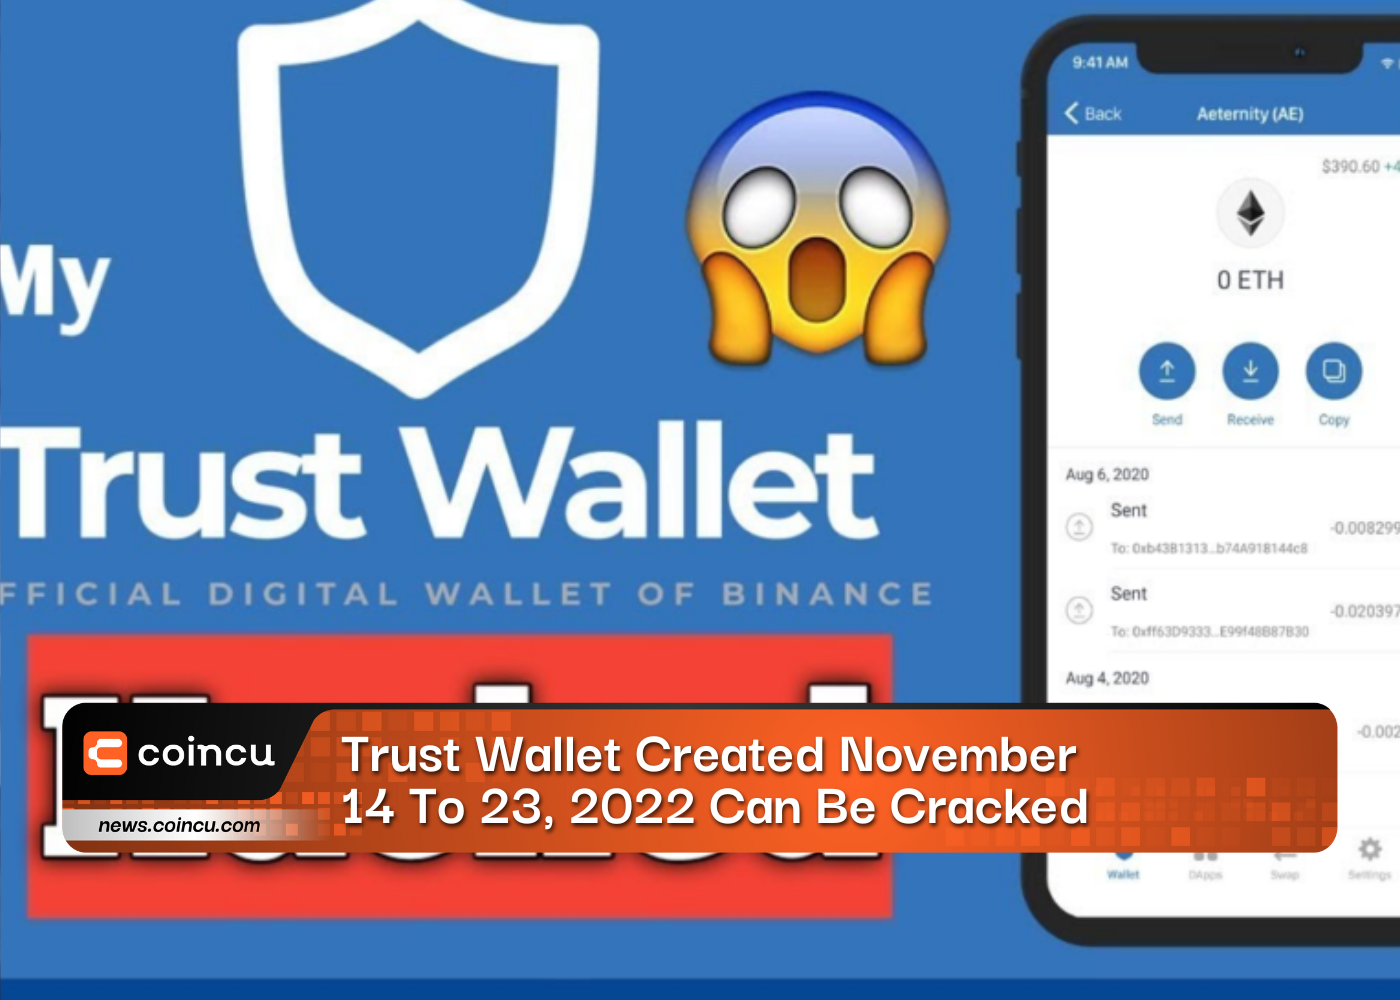 Trust Wallet Created November 14 To 23, 2022 Can Be Cracked